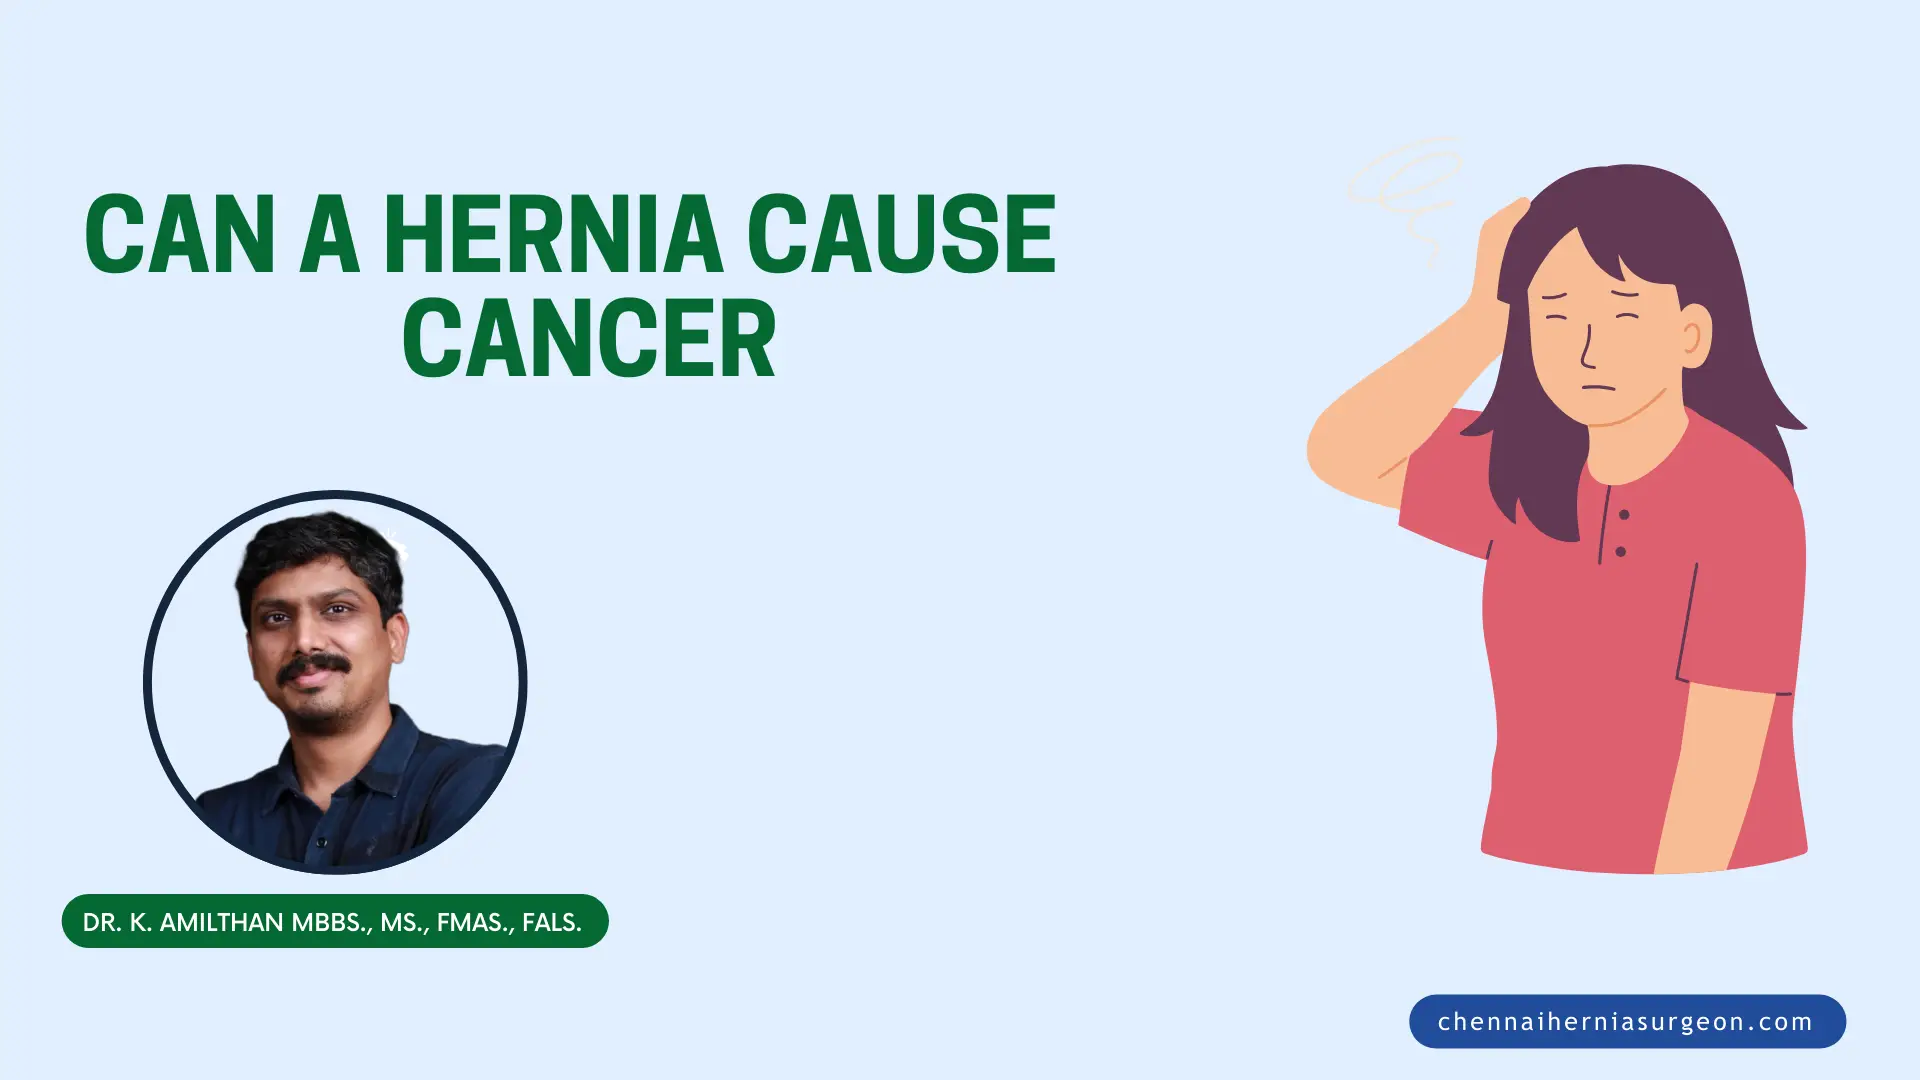 Can hernia cause cancer